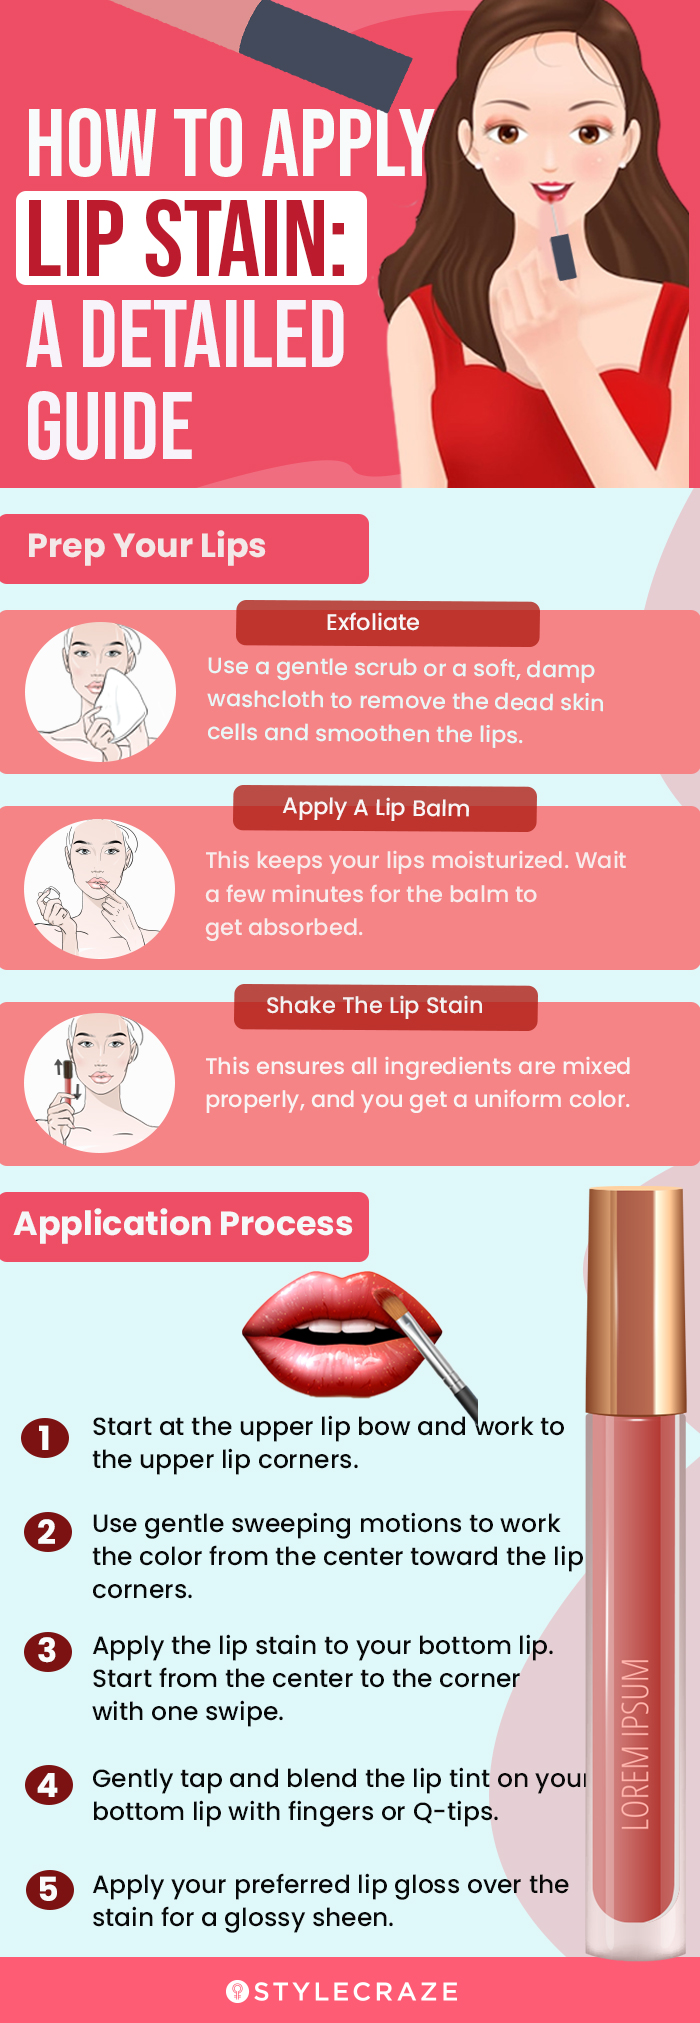 how to apply lip stain a detailed guide [infographic]